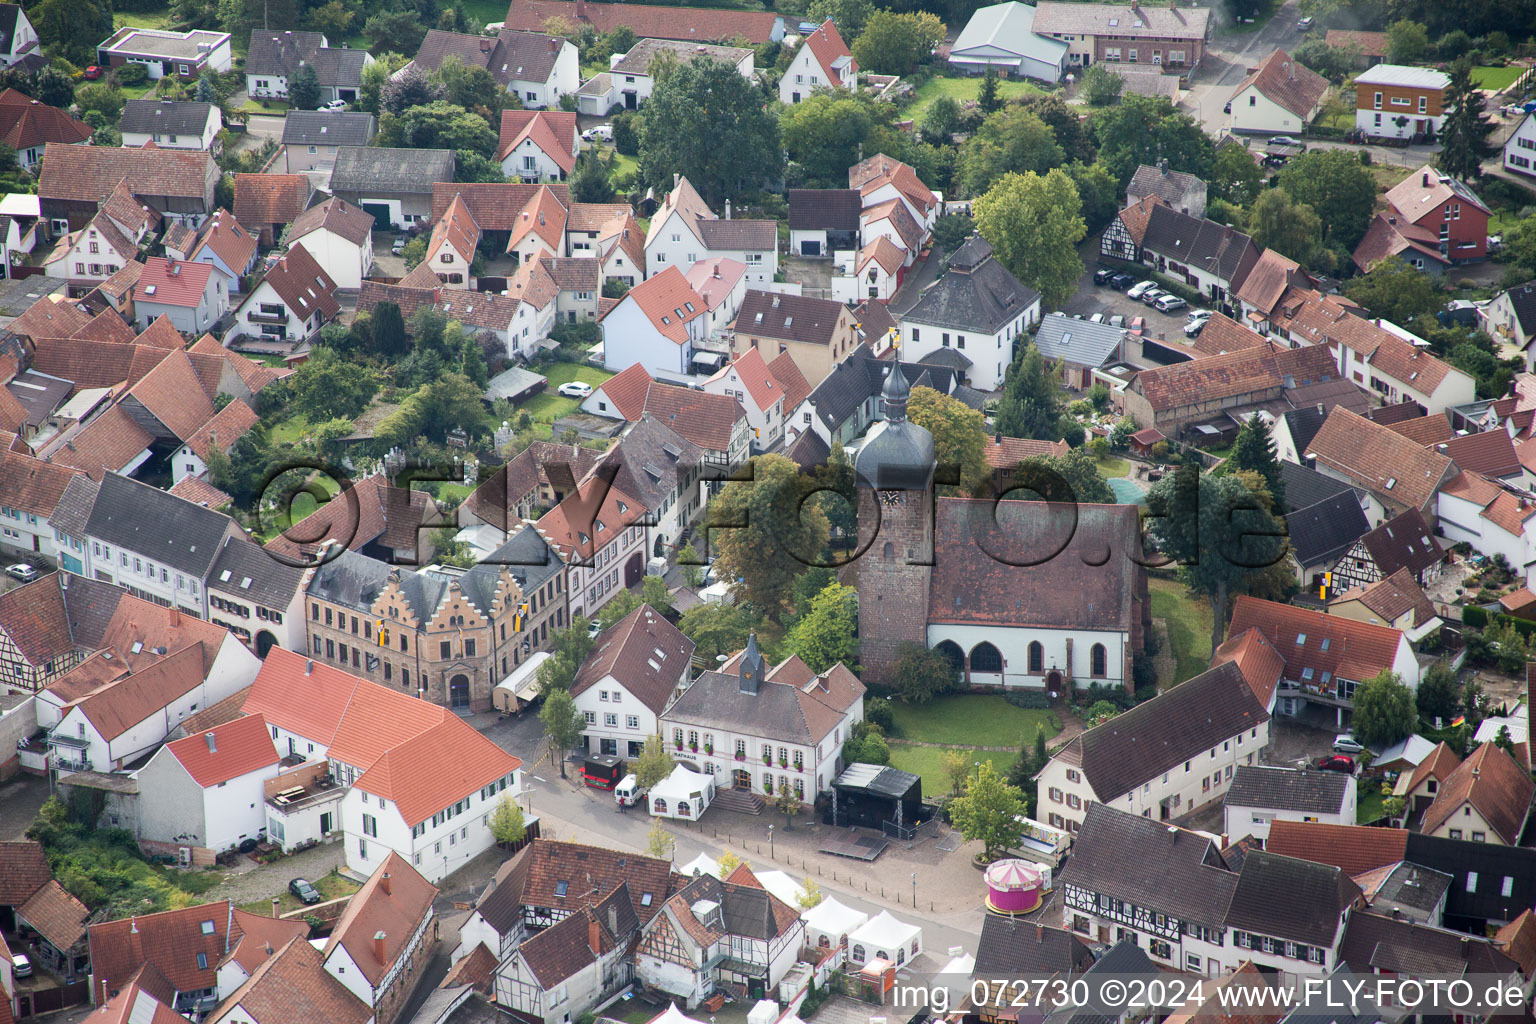 Church building in the village of in the district Billigheim in Billigheim-Ingenheim in the state Rhineland-Palatinate